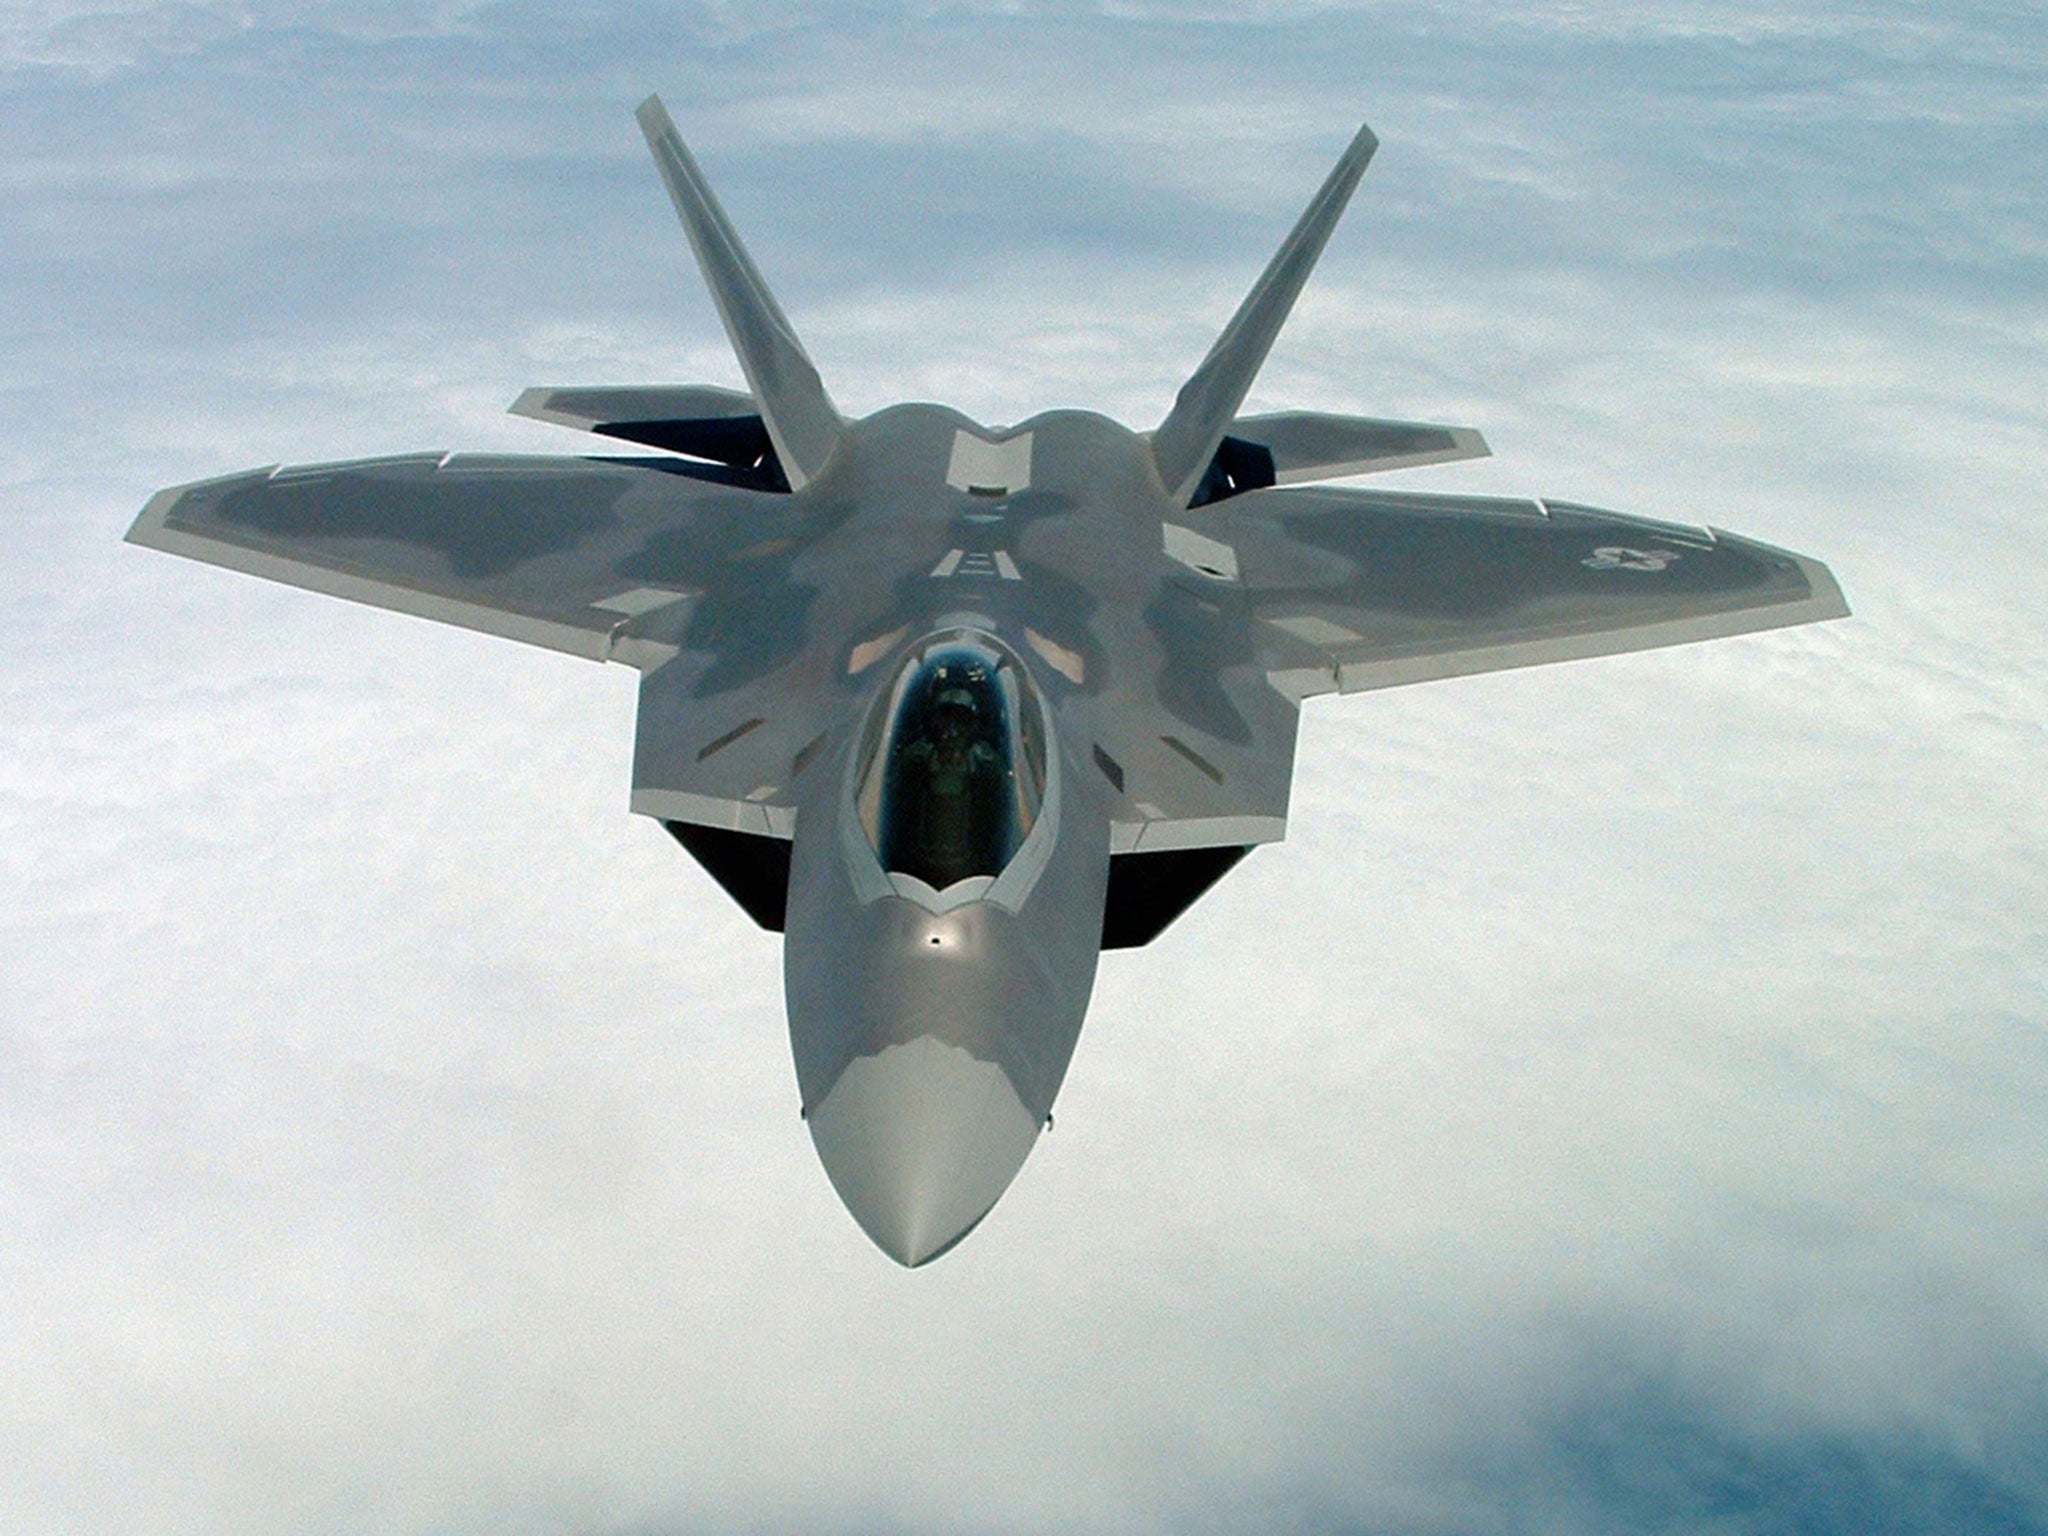 An F-22A Raptor plane used by the US in air strikes against Isis. The strikes have escalated under Trump's presidency